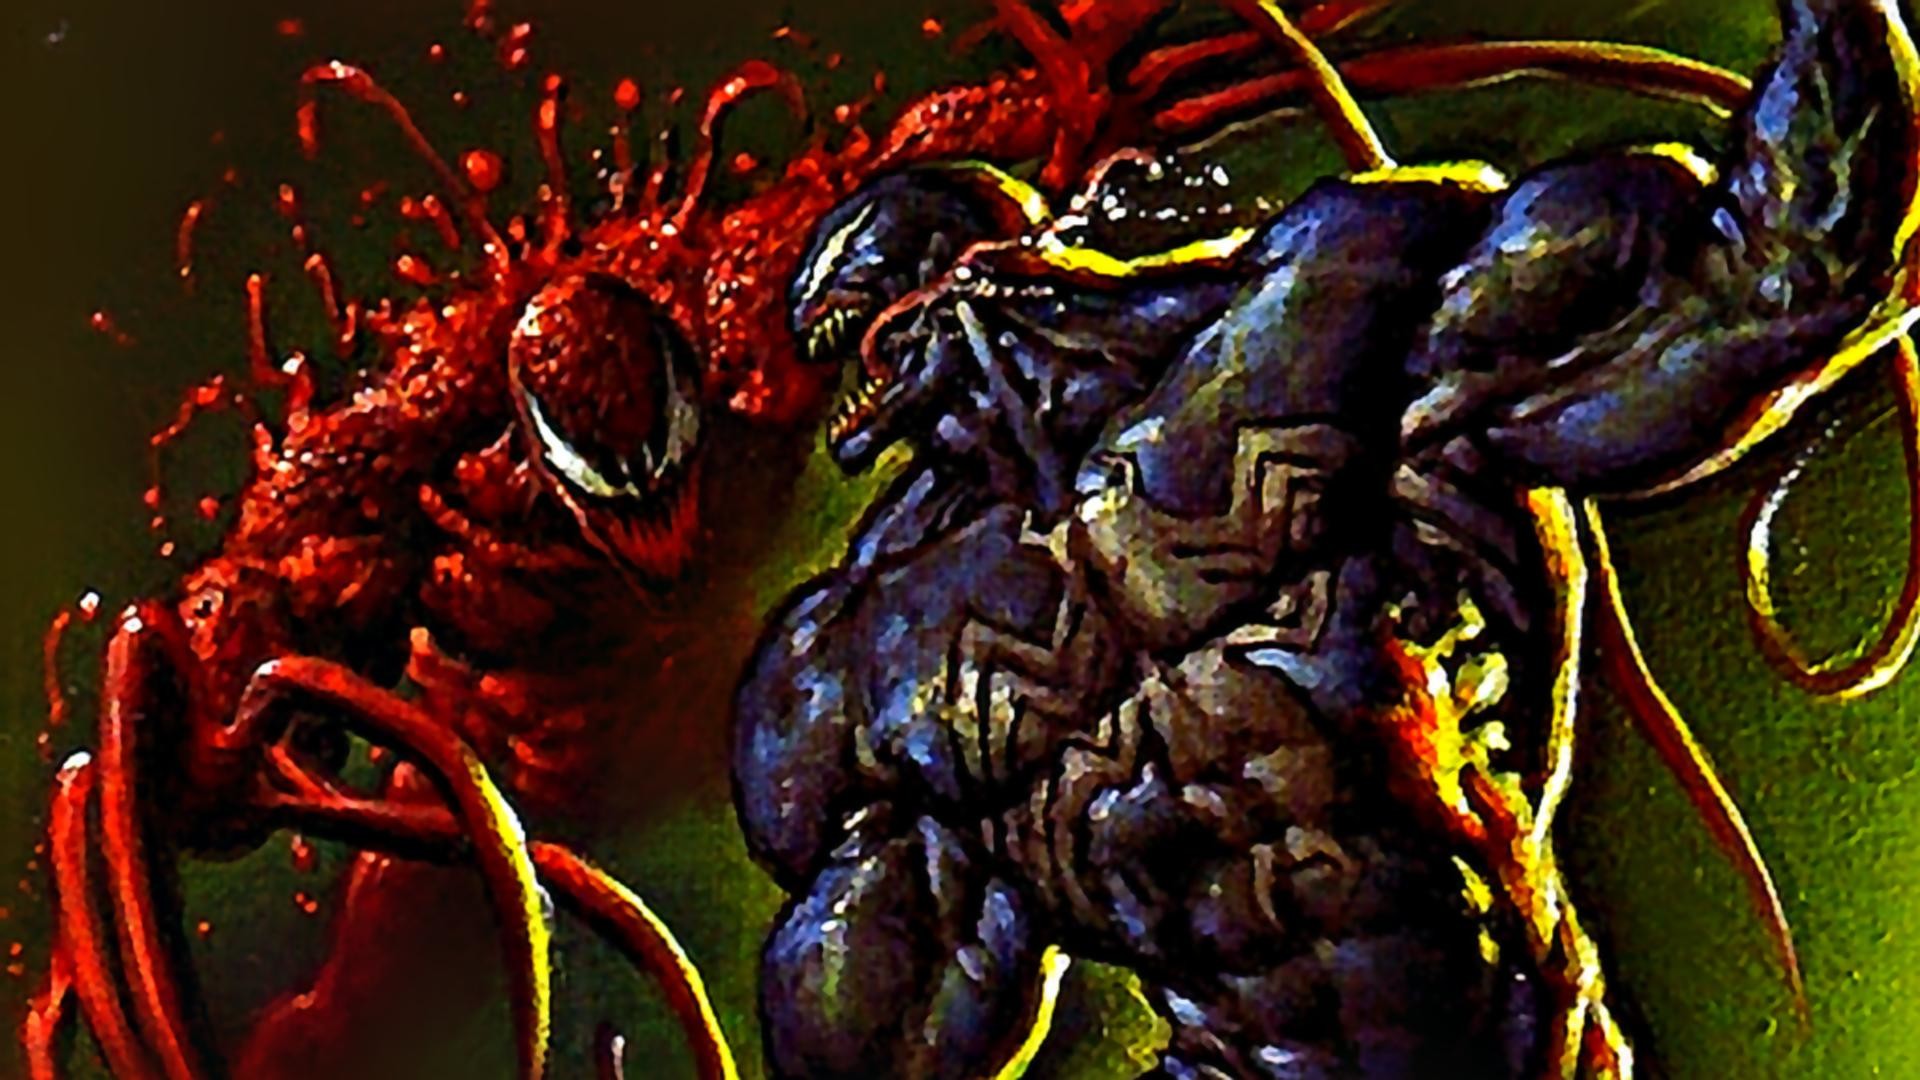 1920x1080 Search Results for “venom vs carnage hd wallpaper” – Adorable Wallpapers